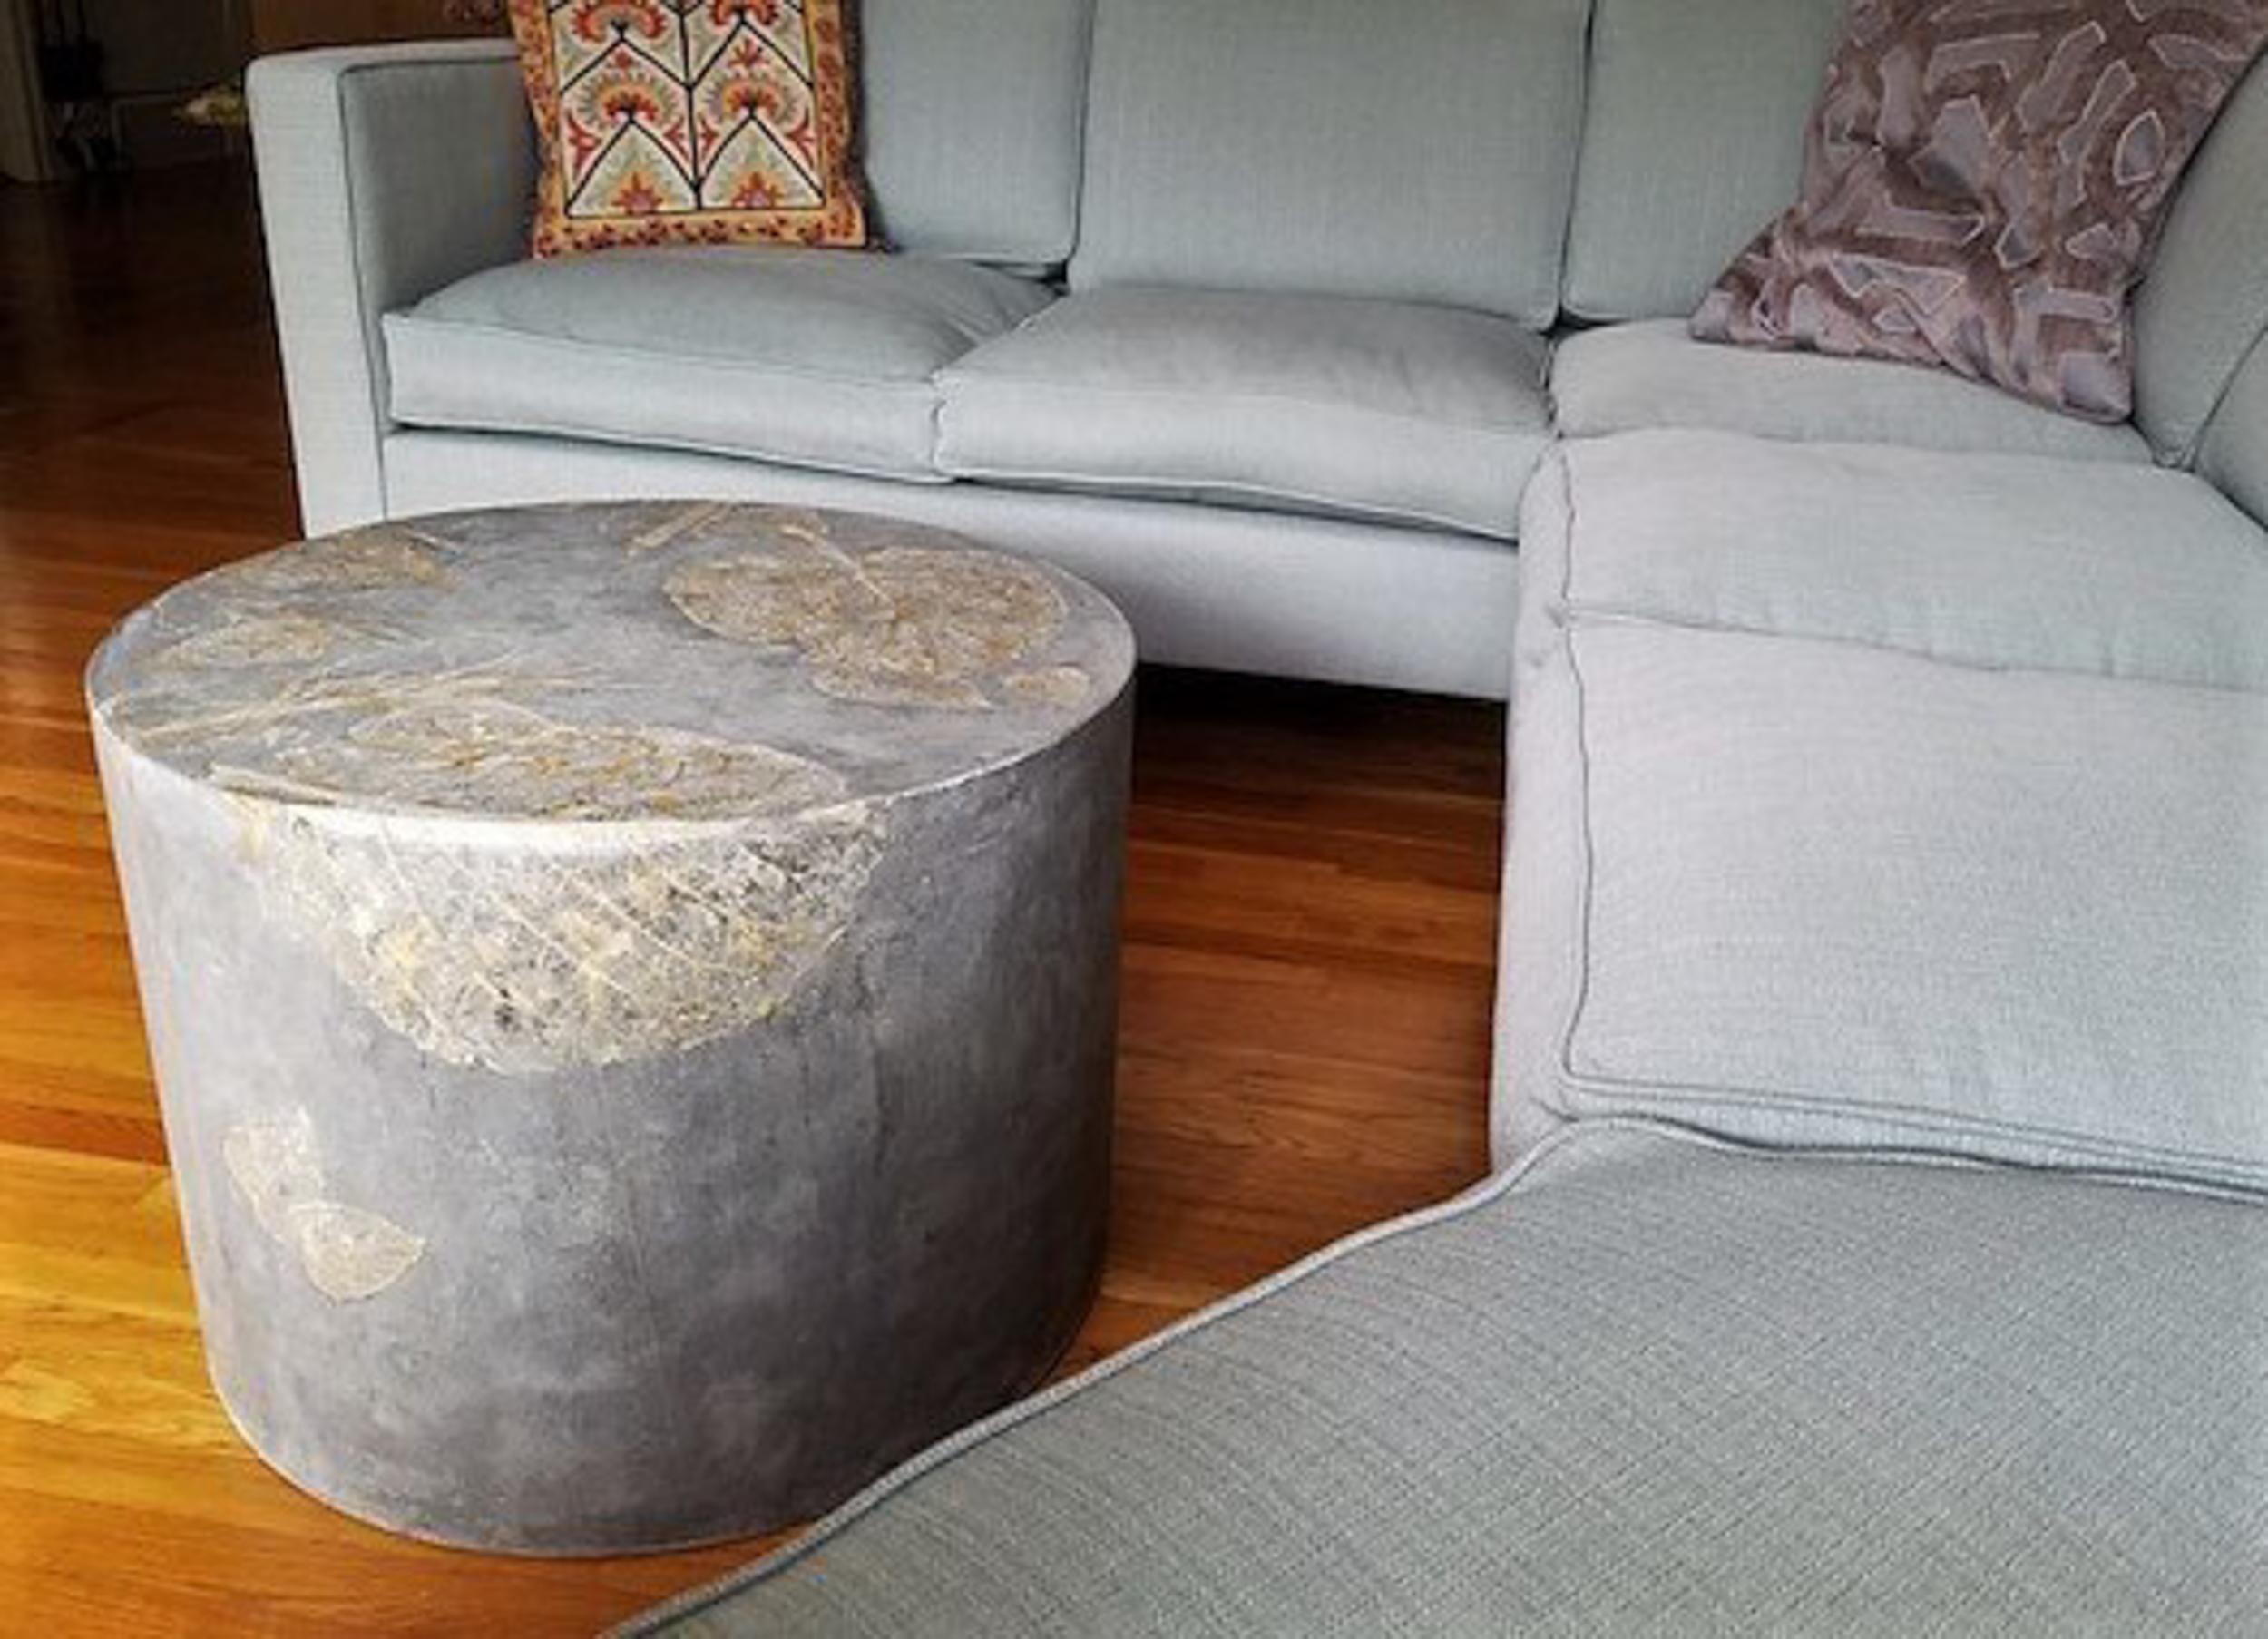 These highly customizable mid-weight round concrete coffee tables with leaf impressions from real leaves can make a natural addition to nearly any room or outdoor environment. The fossil-like leaf imprints soften the brutalist material of cement